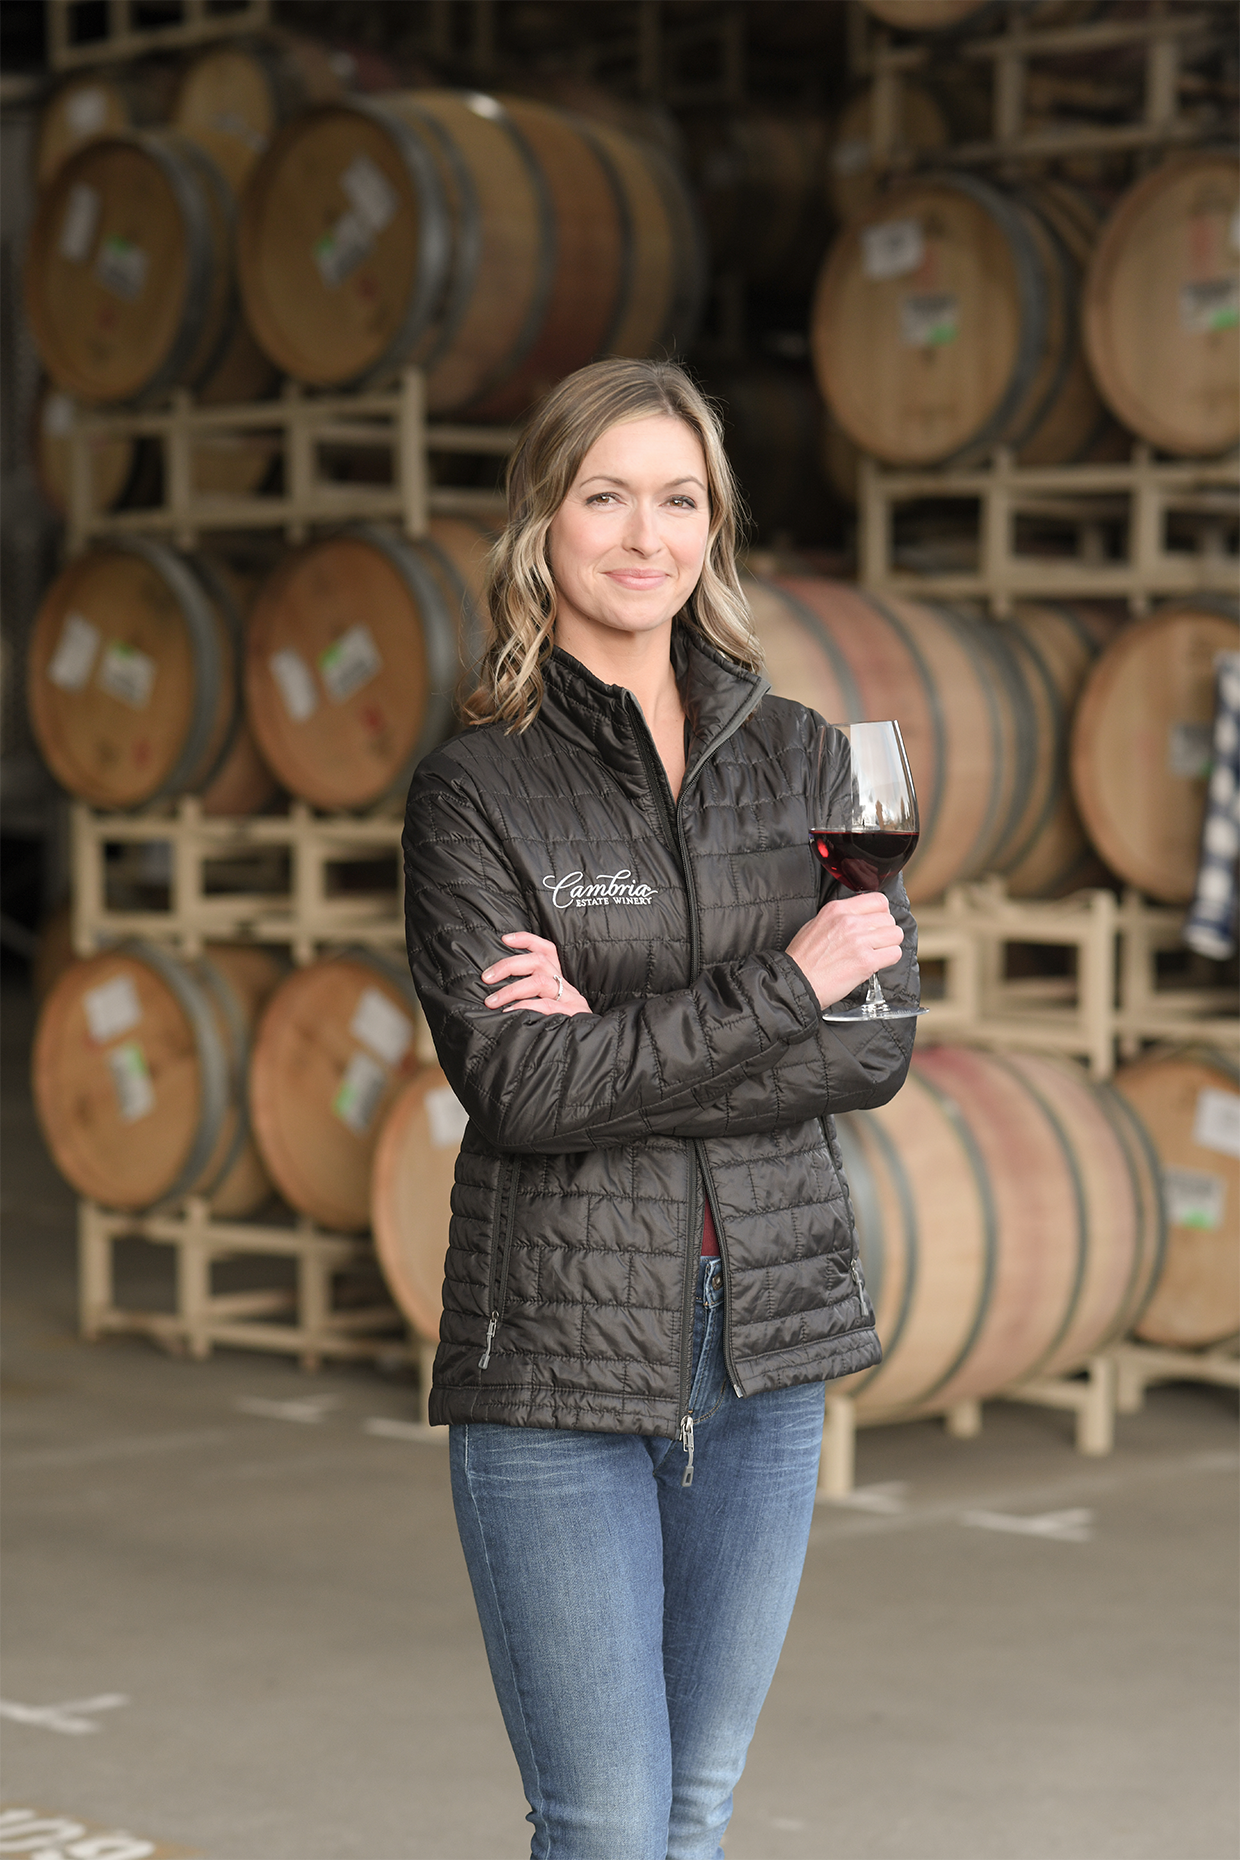 Cambria Estate Winery Winemaker Jill Russell